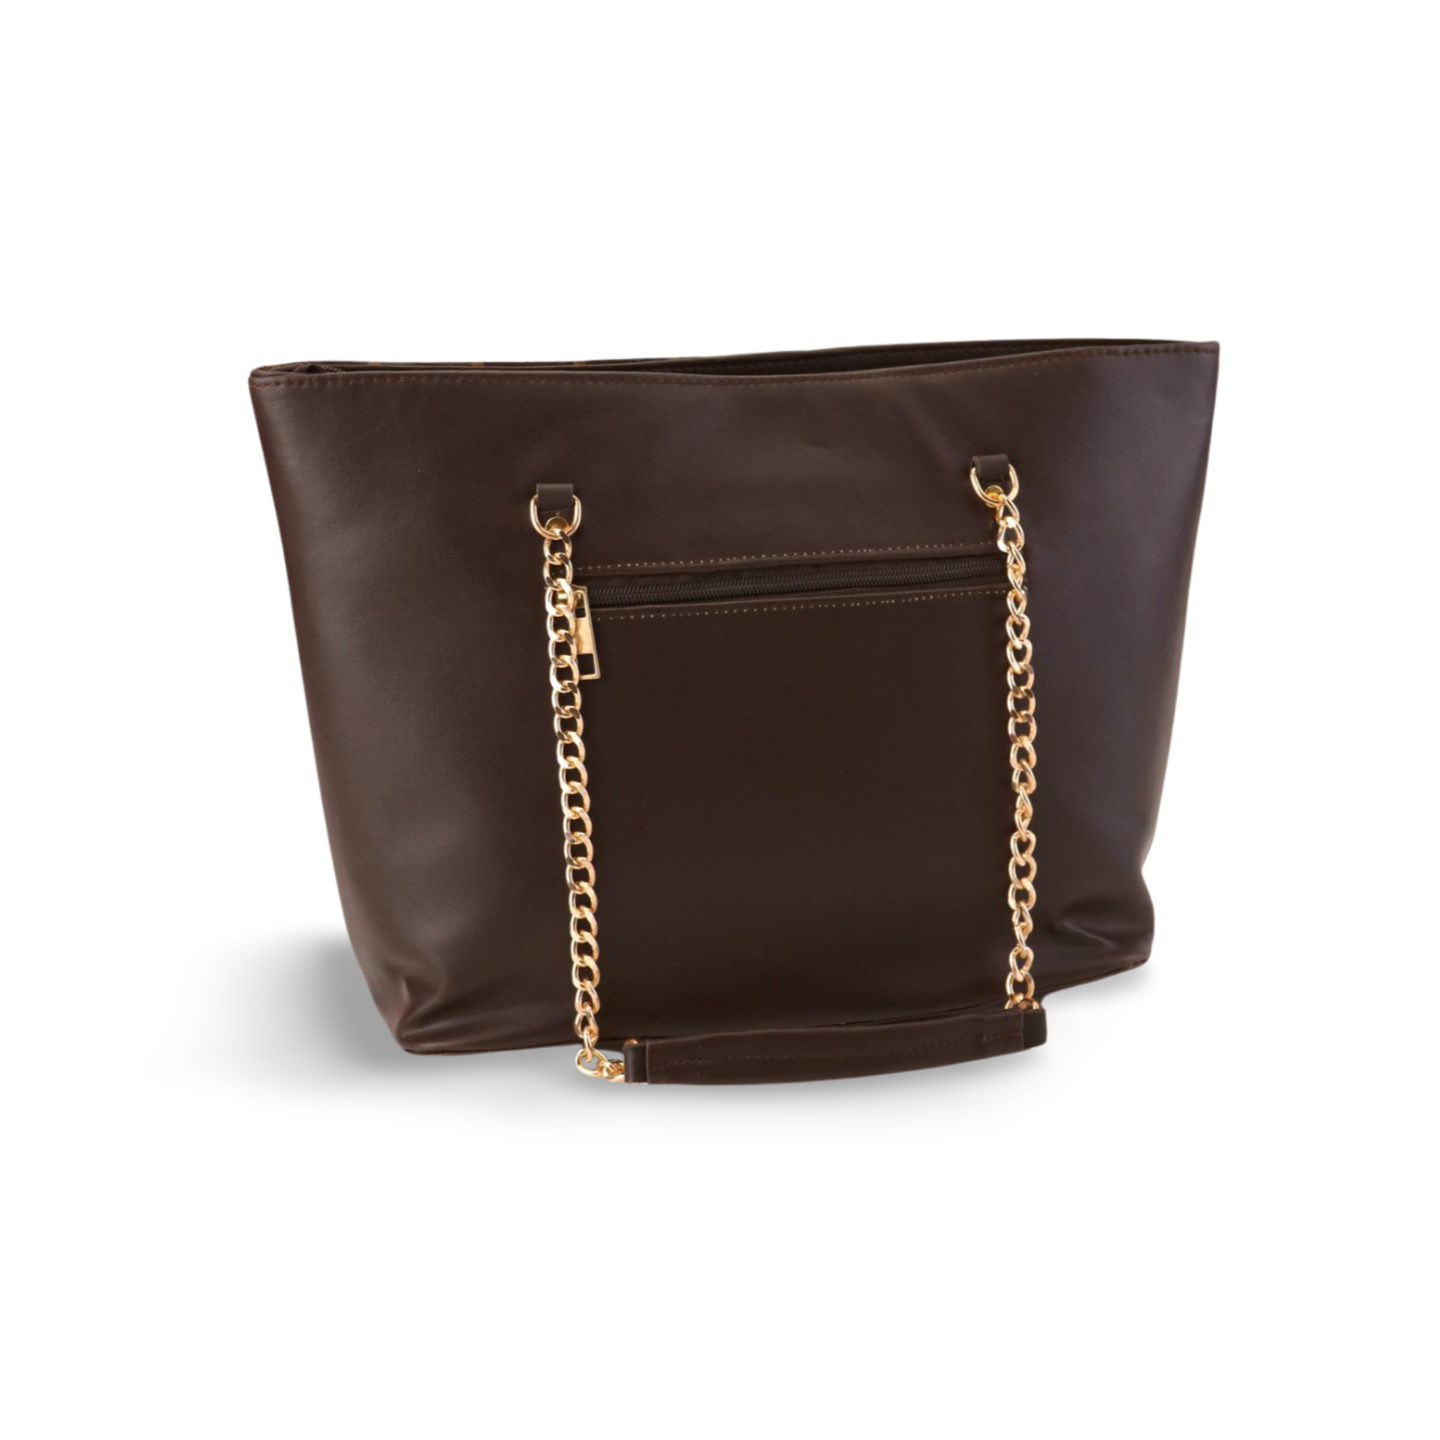 Stylish Tote Bag with Gold Chain | Designer Tote Bags for Women